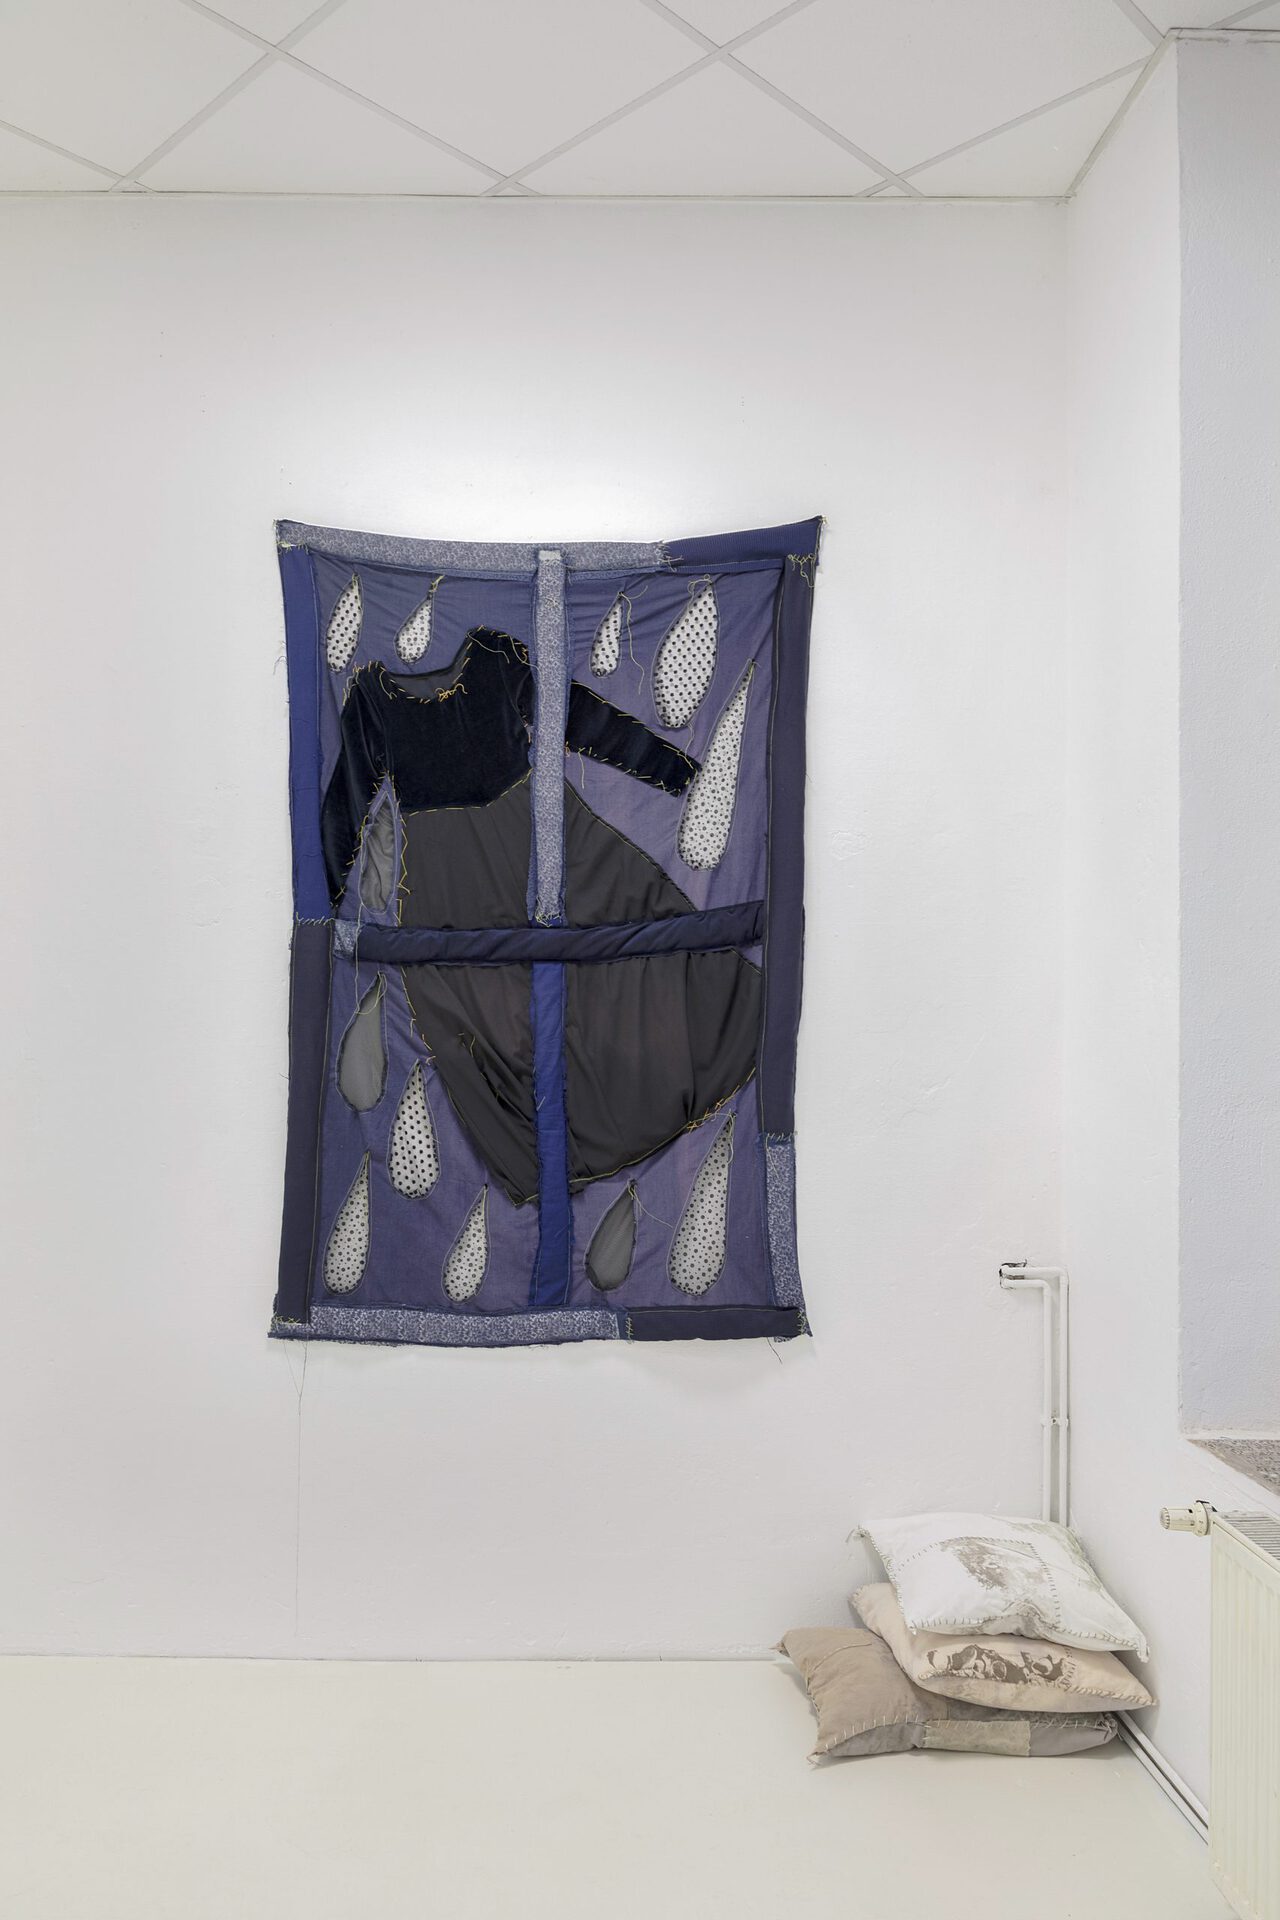 Anna Hostek / COCO'S WINDOW / 2019 / collected textile / more info @ www.fonda.space